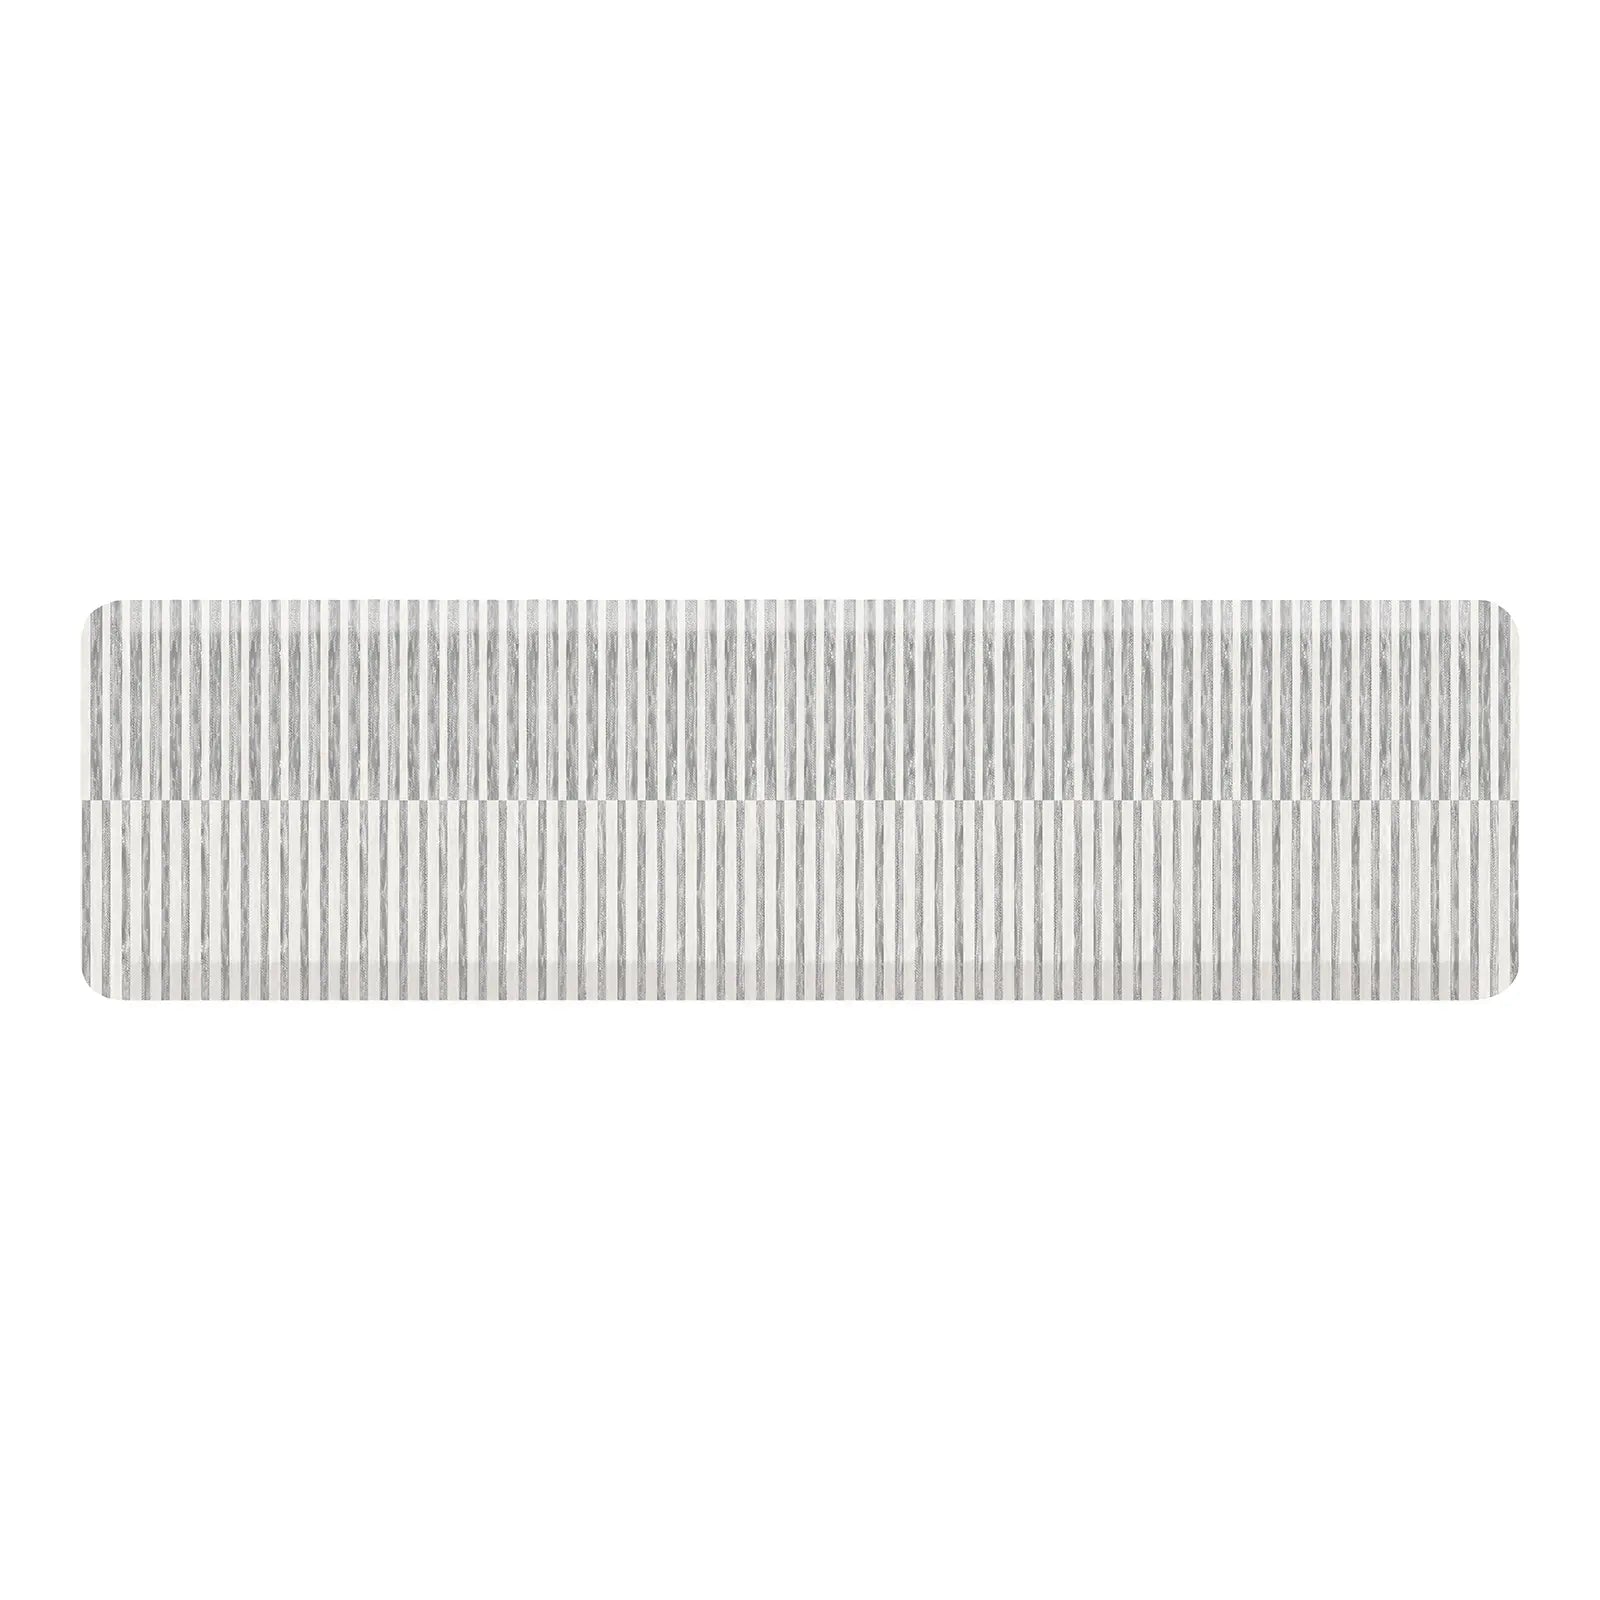 Reese pewter gray and white inverted stripe standing mat shown in size 22x72